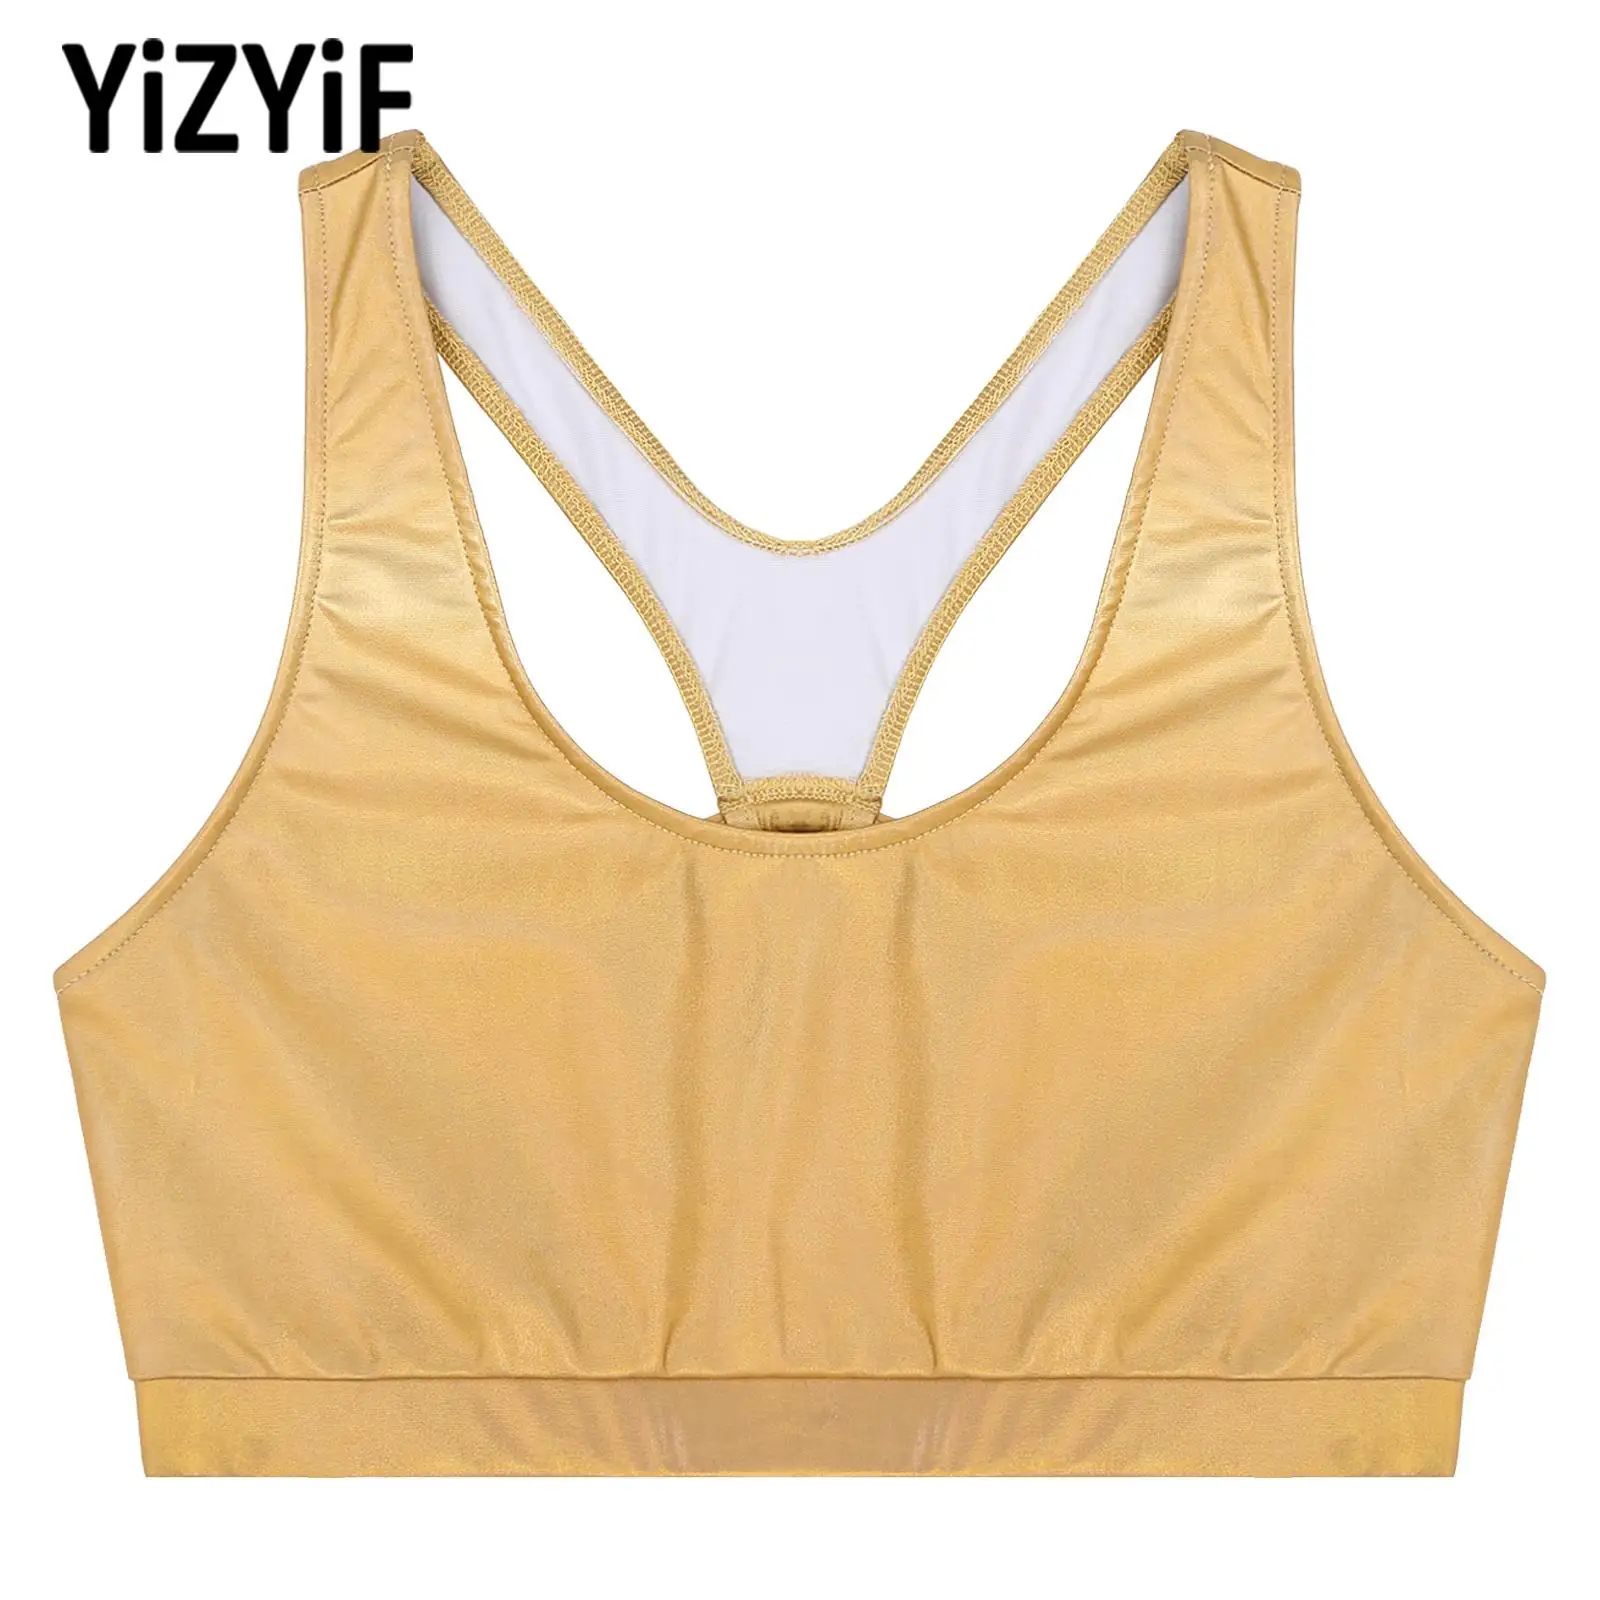 

Hot Women's Casual Running Yoga Vest Sports Top Sleeveless Strappy Cutout Back Crop Top Shiny Metallic Raves Dance Tops Clubwear